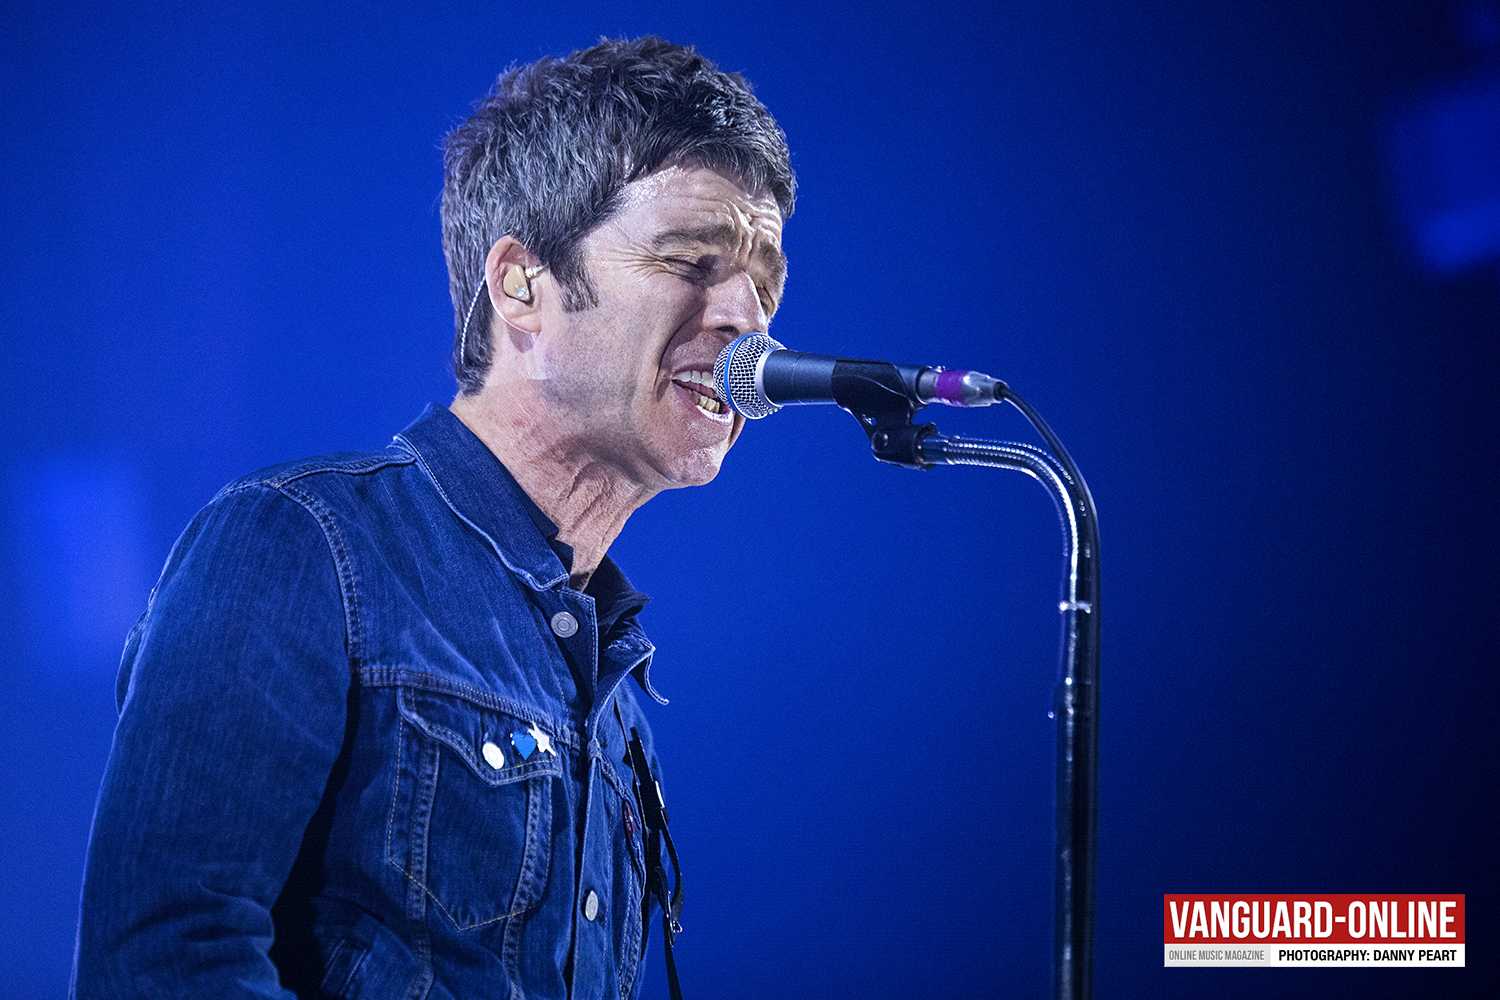 Noel_Gallagher_DANNY_PEART_VO